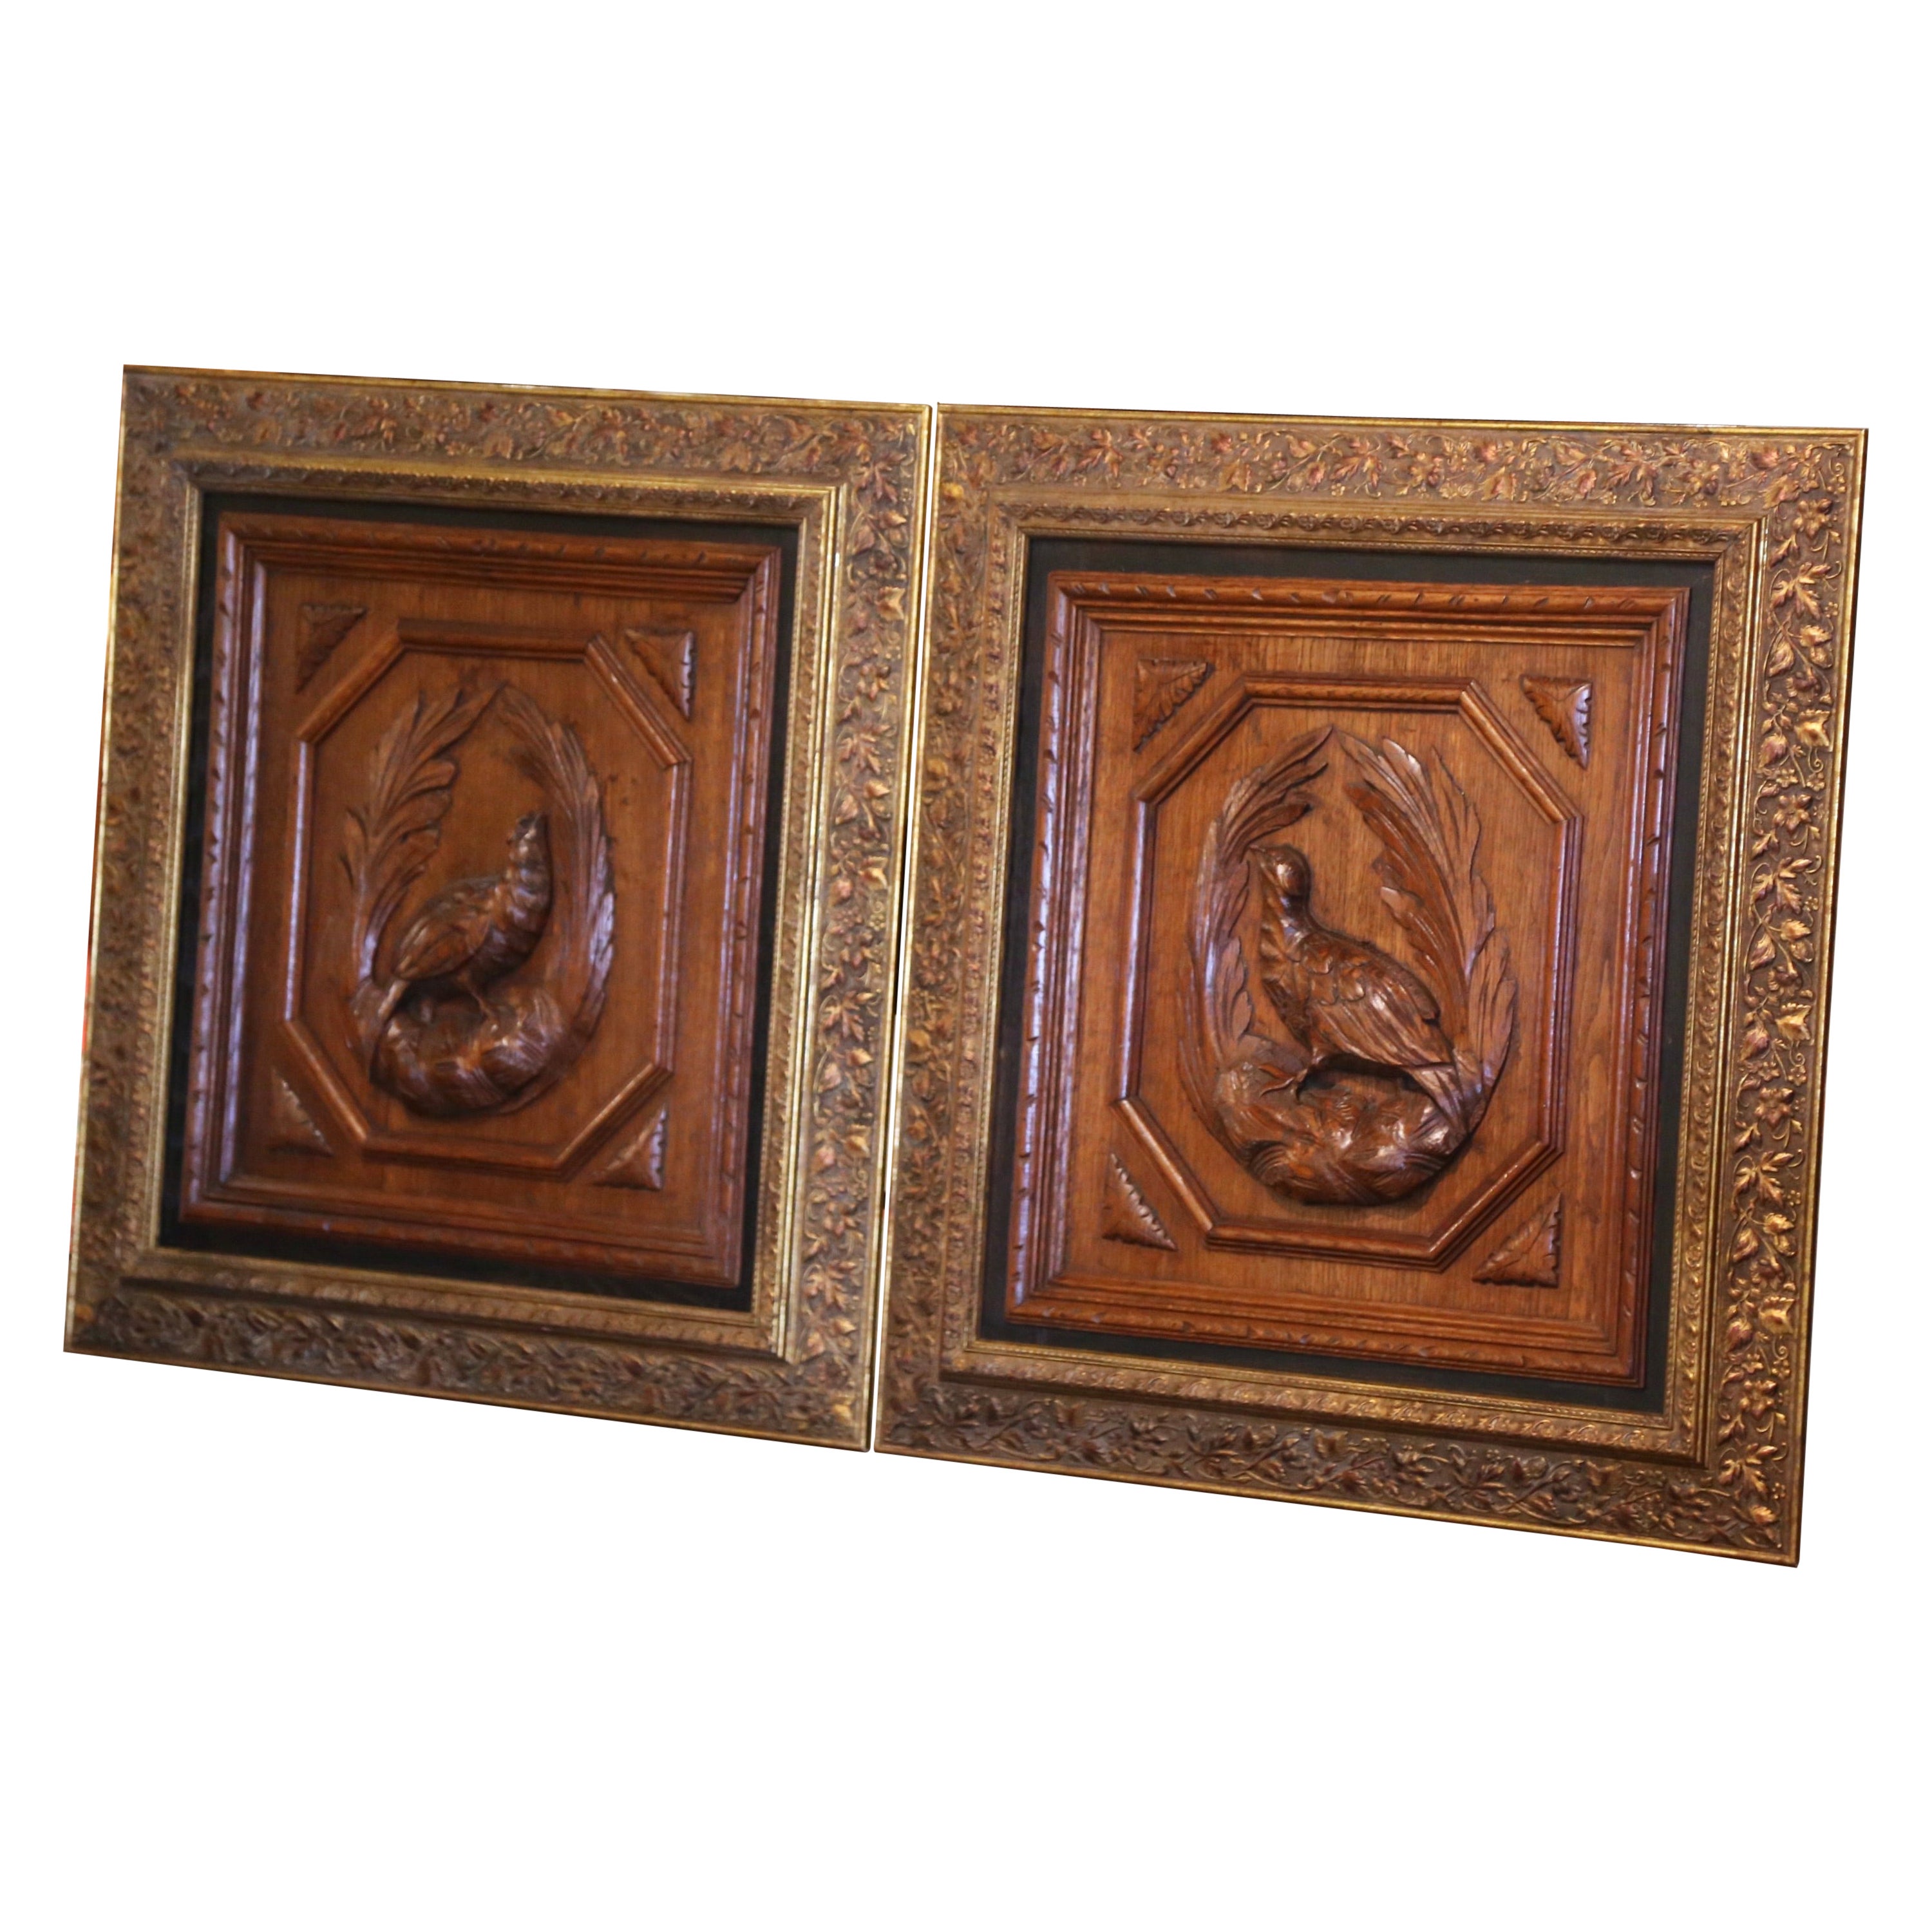 Pair of 19th Century French Carved Oak Wall Panels with Pheasants in Gilt Frames For Sale